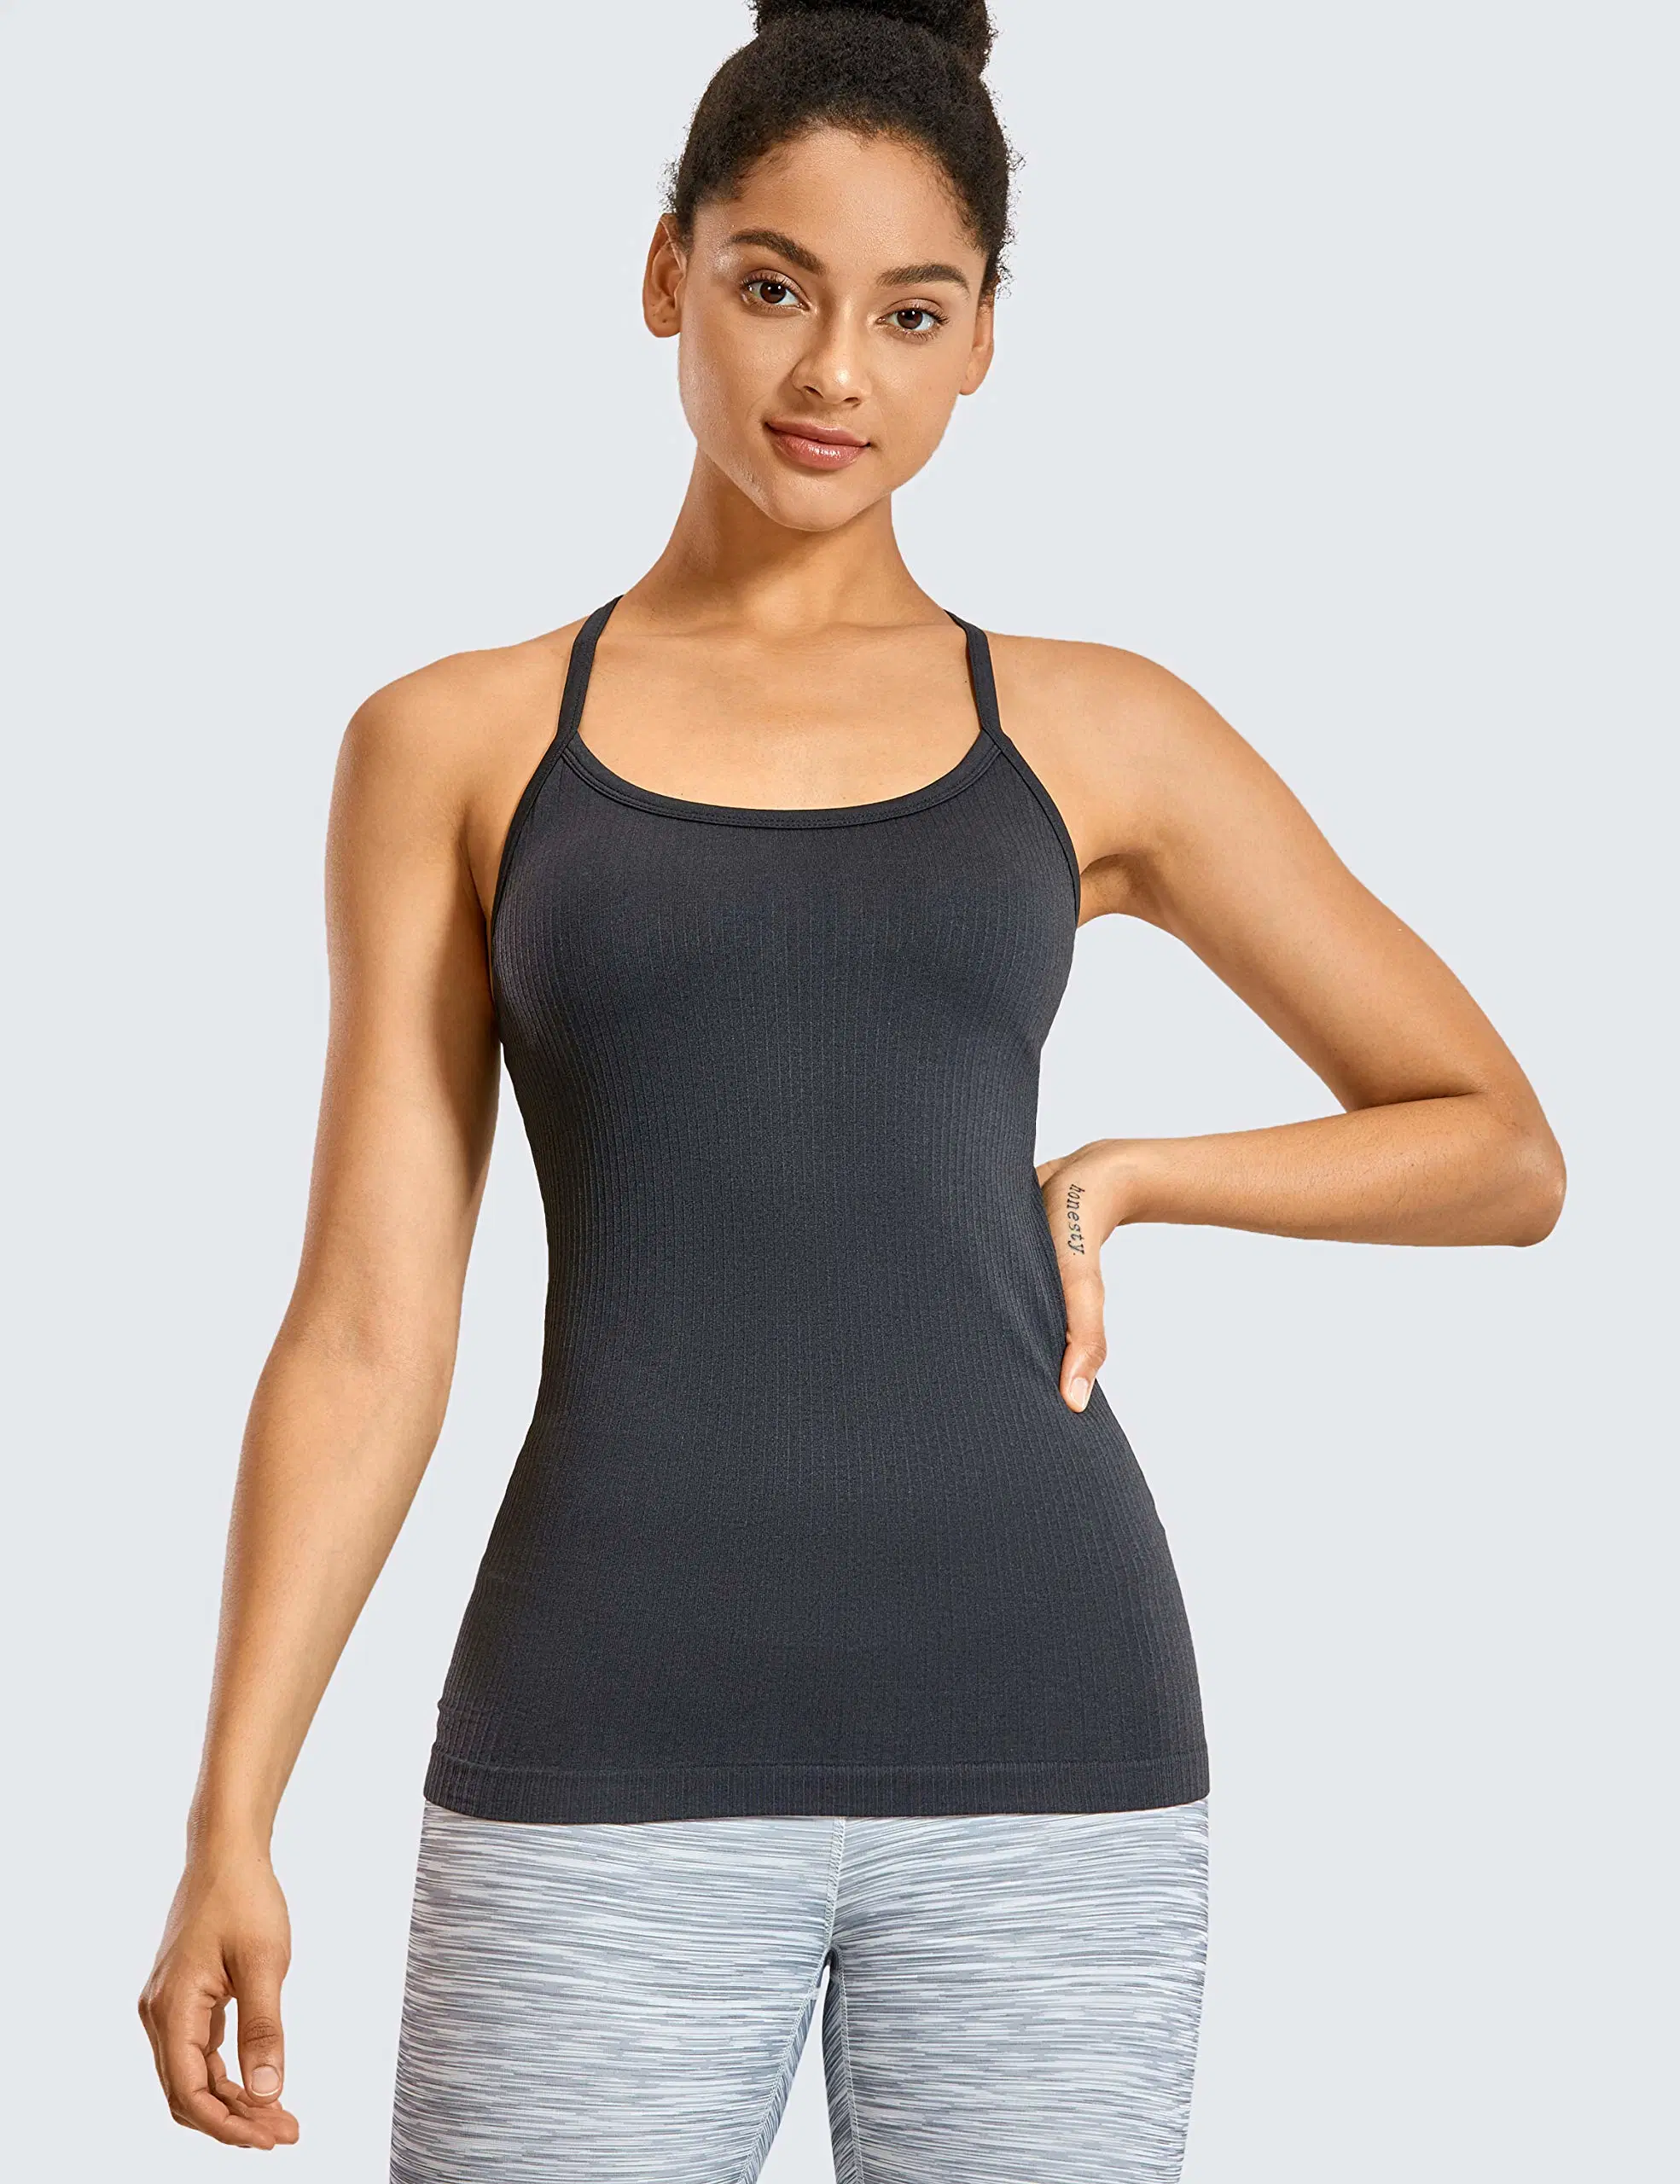 Cusstomized Seamless for Women Racerback Athletic Camisole Workout Tank Tops